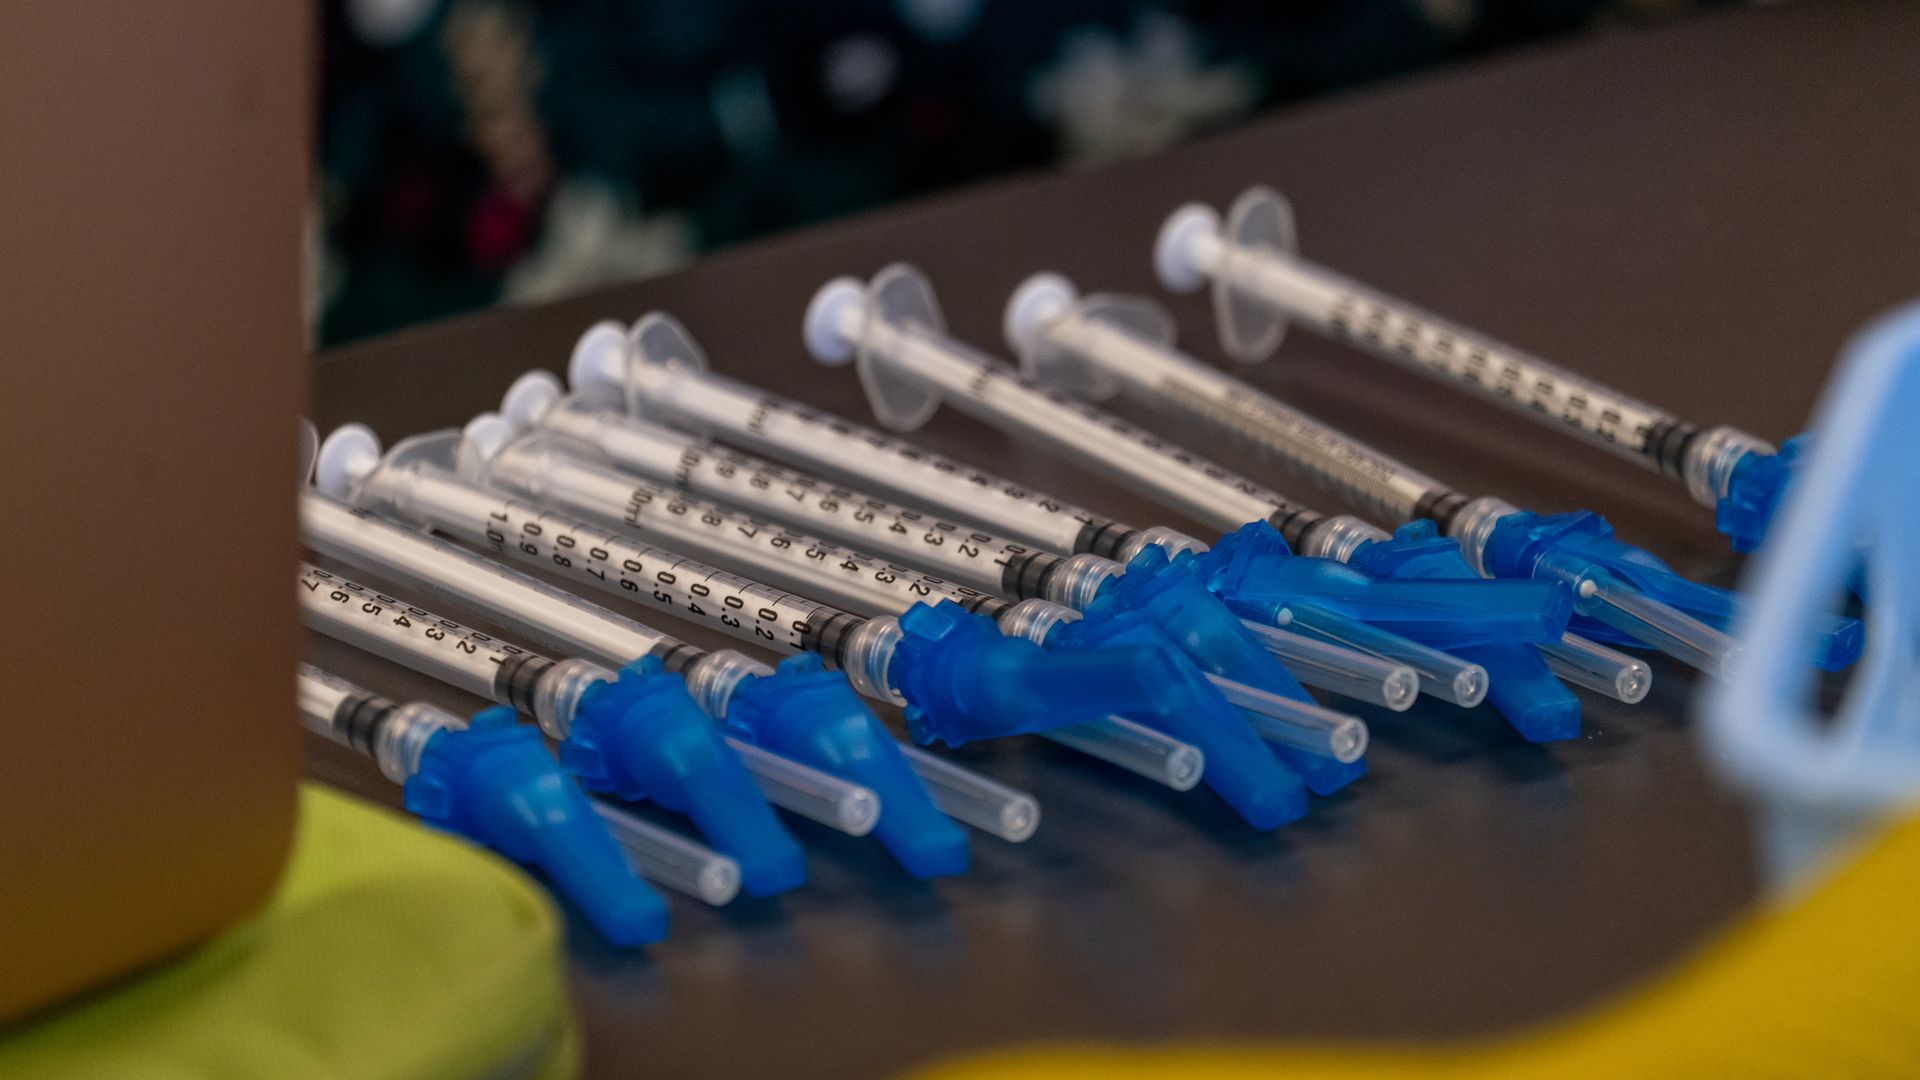 Pfizer-BioNTech Covid-19 vaccine syringes at a vaccination clinic in the Peabody Institute Library in Peabody, Massachusetts, U.S., on Wednesday, Jan. 26, 2022.